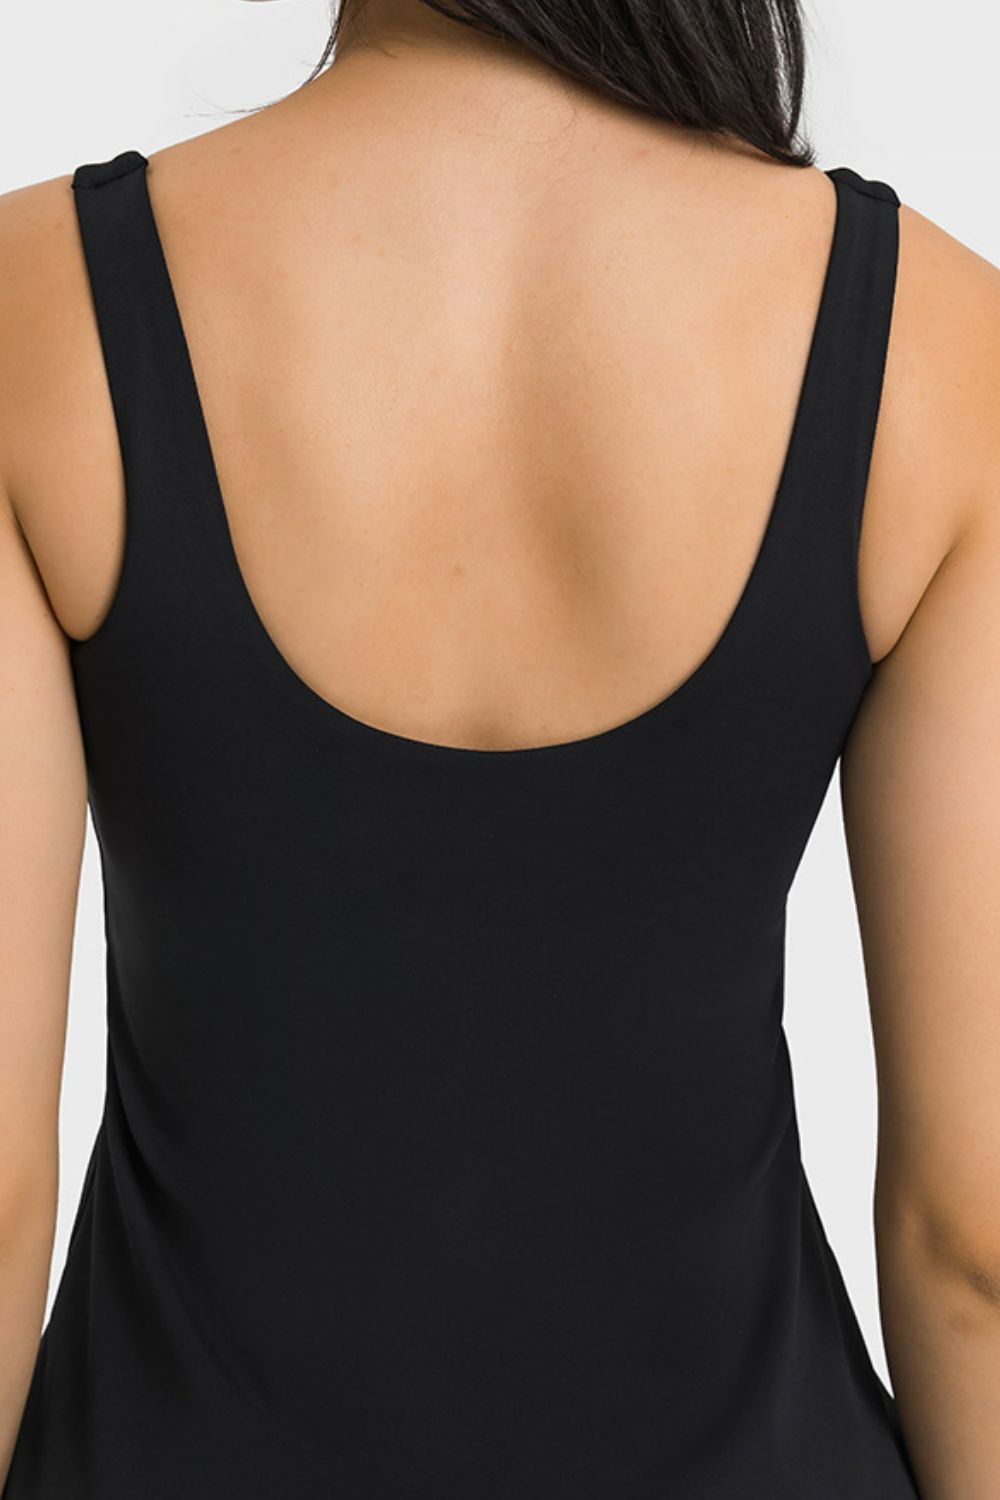 Full Coverage Shortie Bottom One-piece Activewear Athletic Tennis Dress